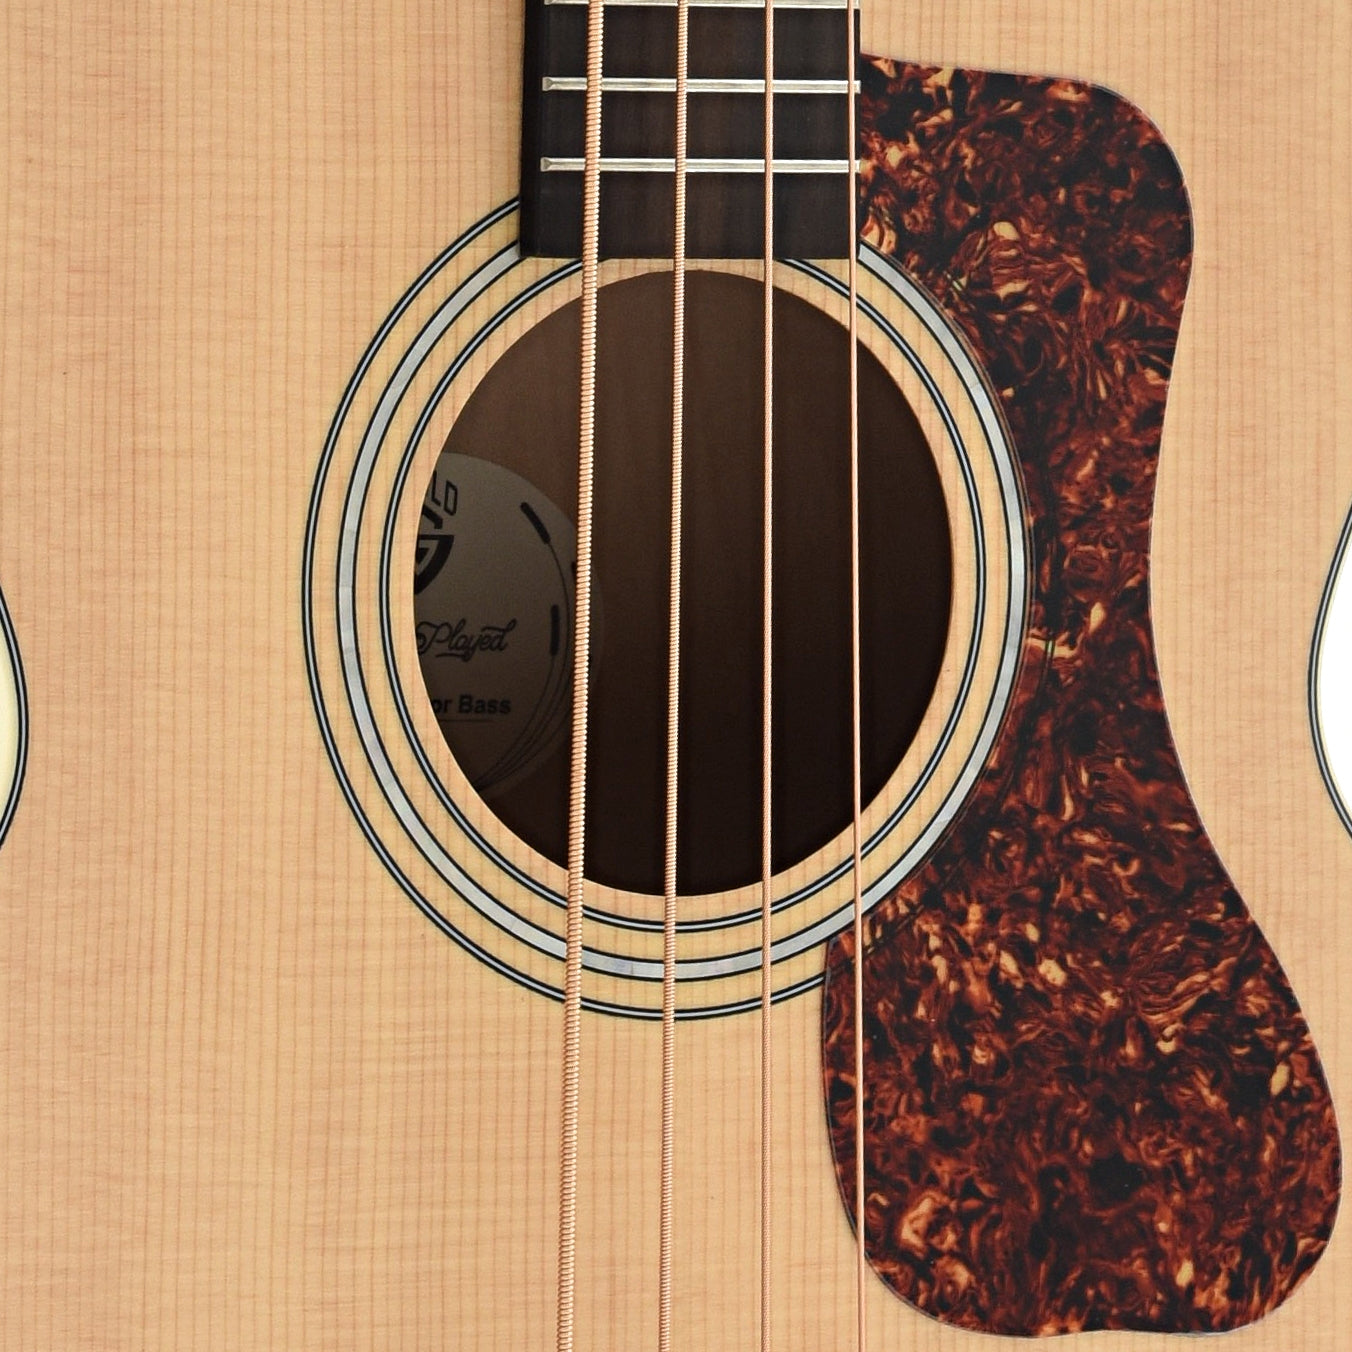 Soundhole and Pickguard of Guild Jumbo Junior Acoustic Bass Guitar